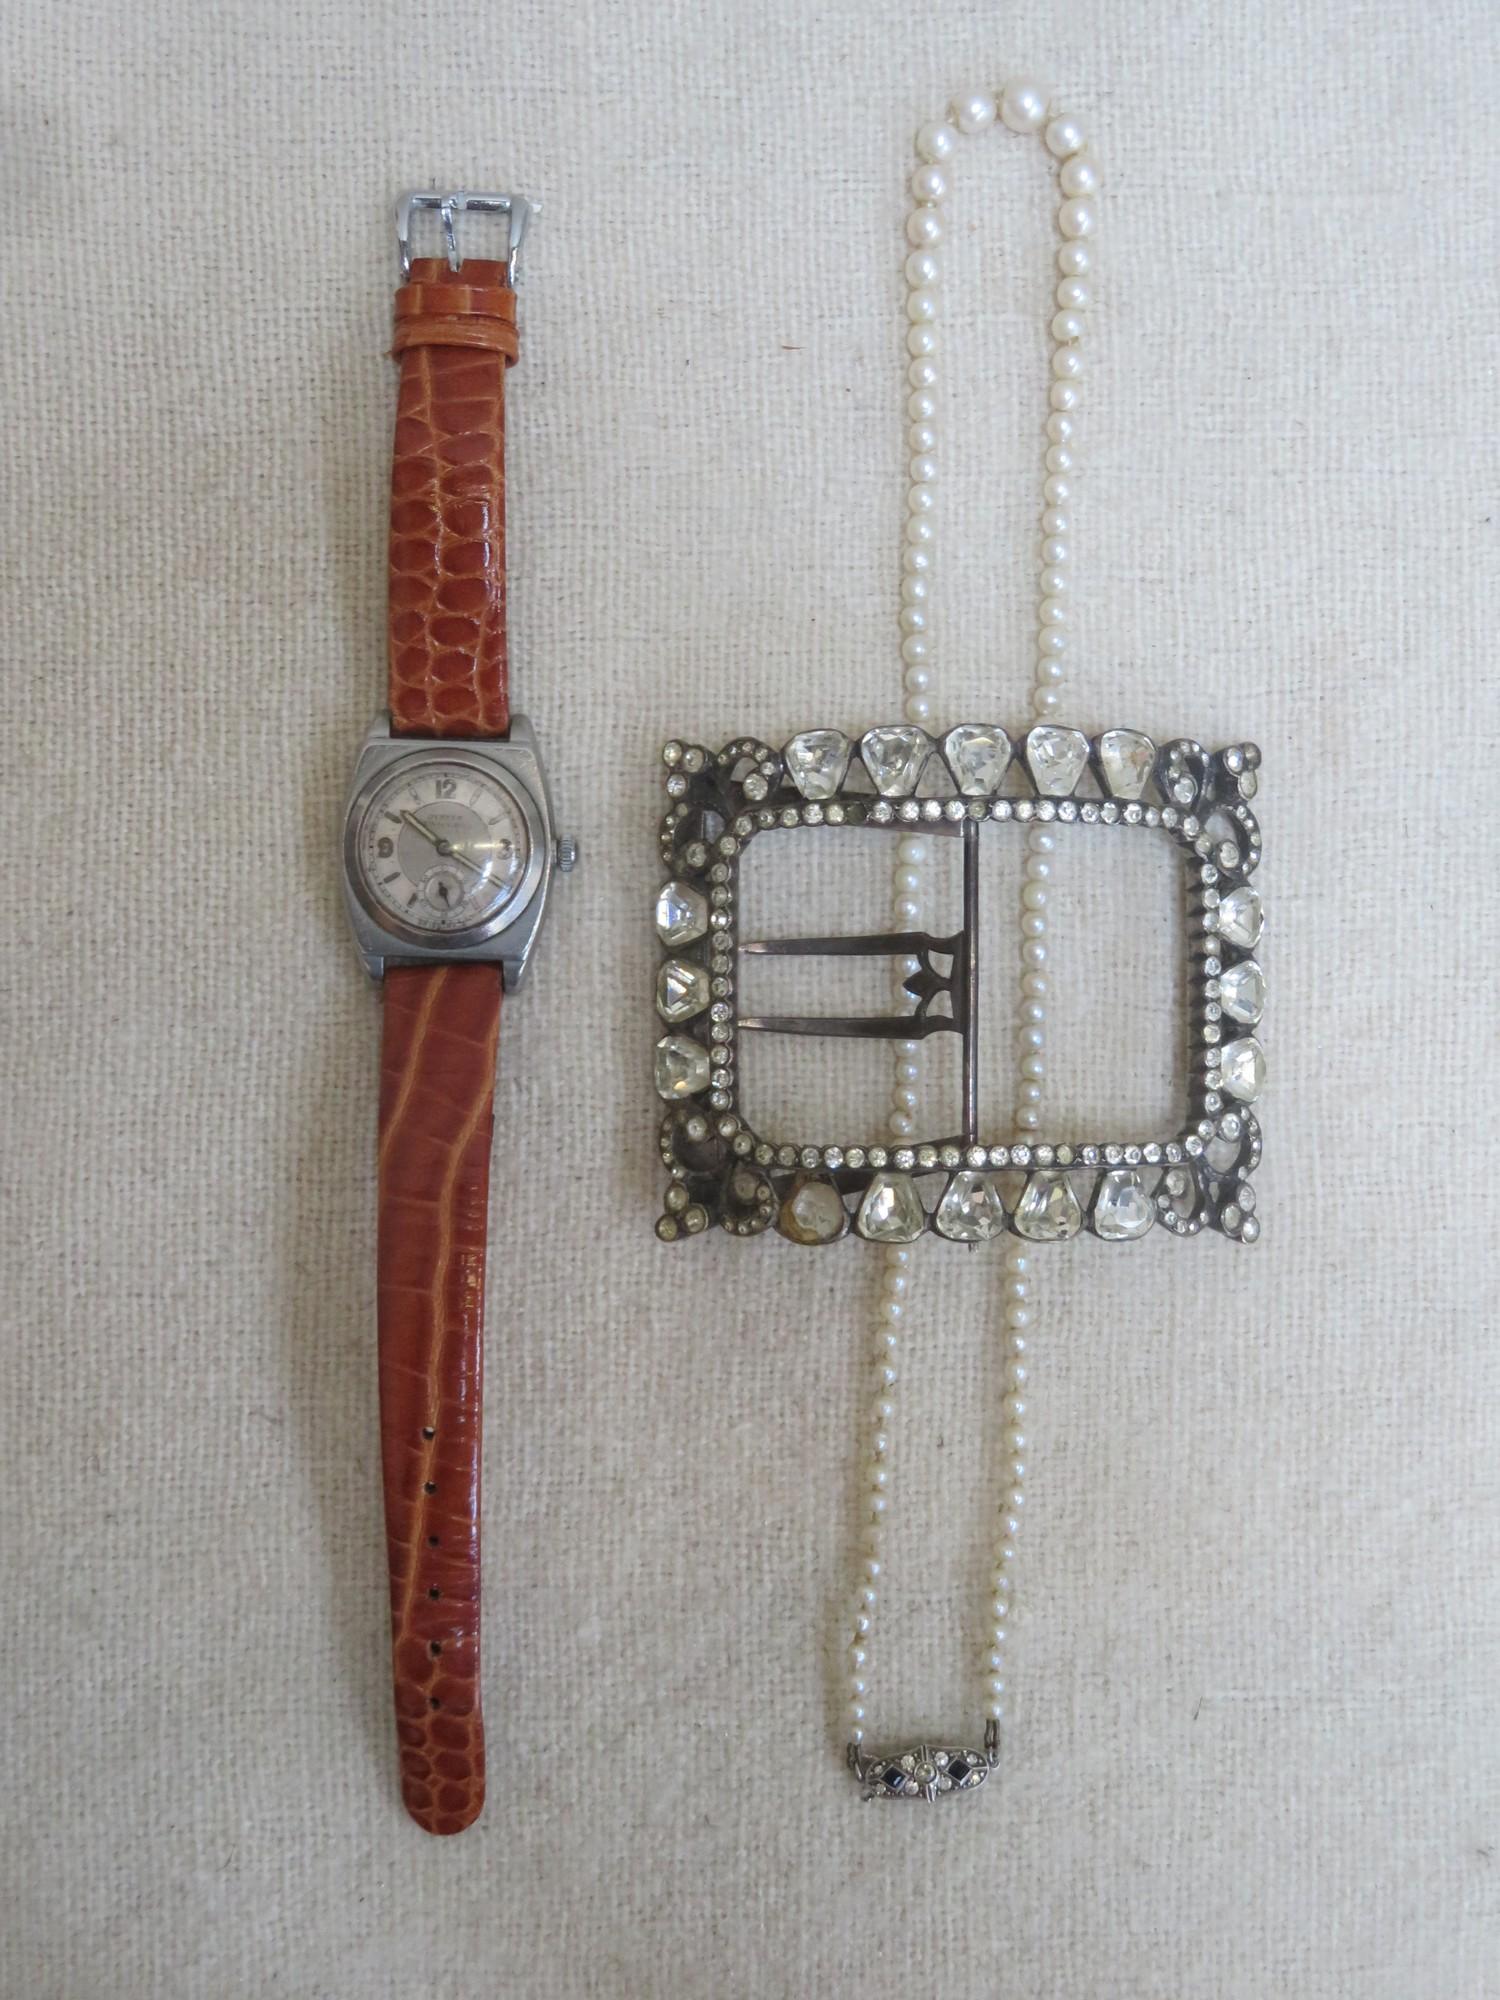 Oyster Unicorn by Rolex, early/mid 20th century wristlet watch with circular dial, luminescent